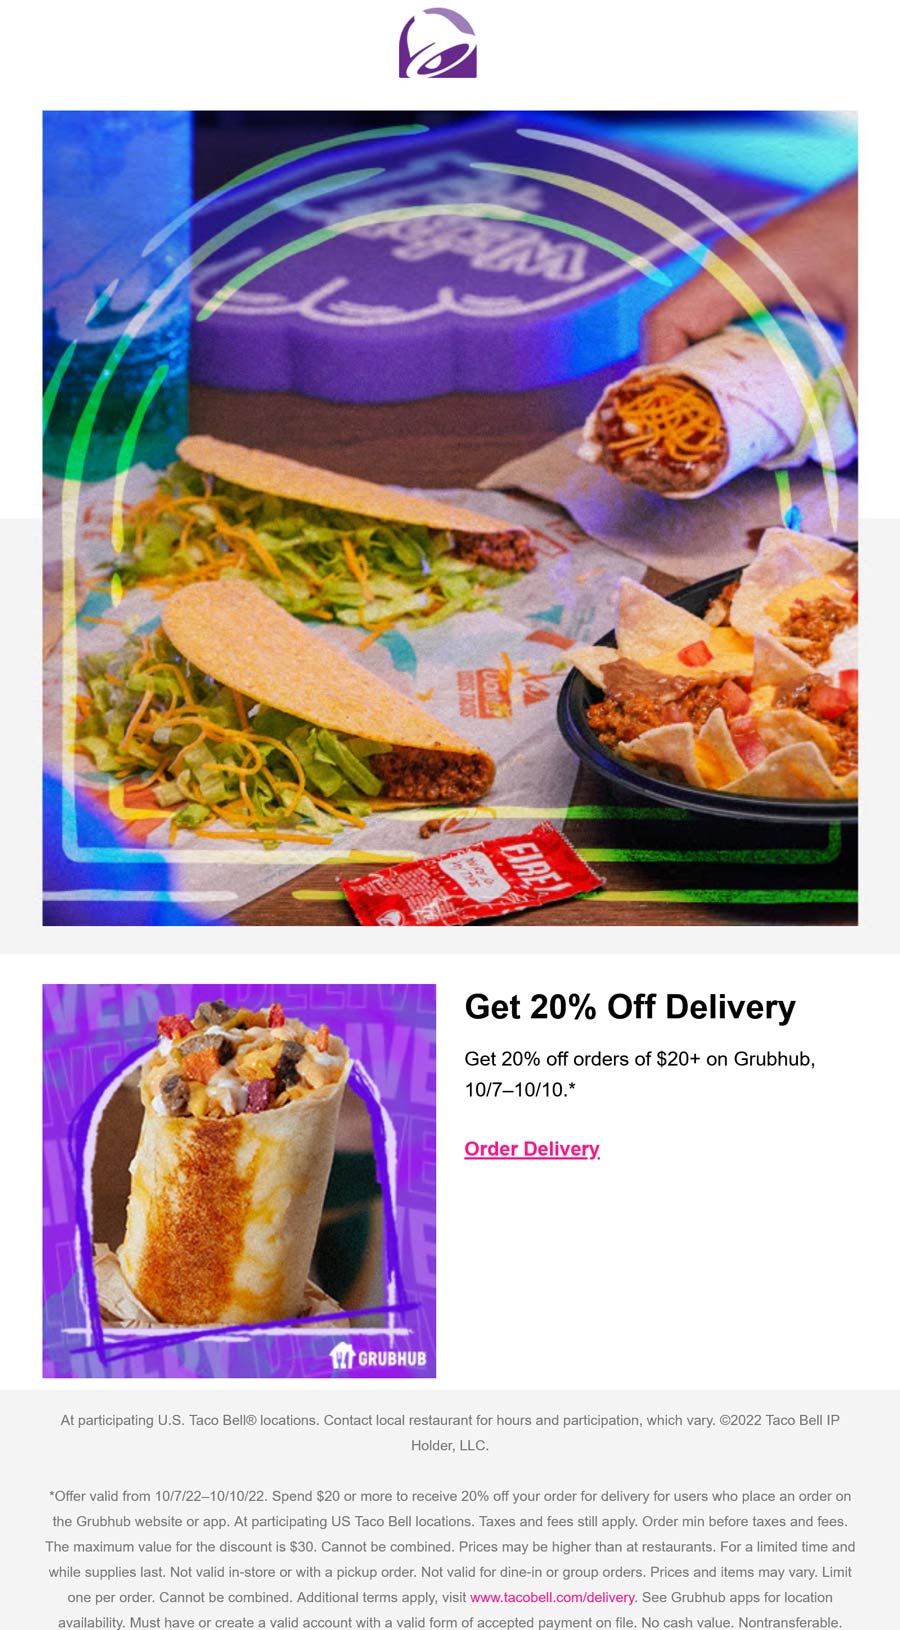 Taco Bell restaurants Coupon  20% off your delivery order at Taco Bell #tacobell 